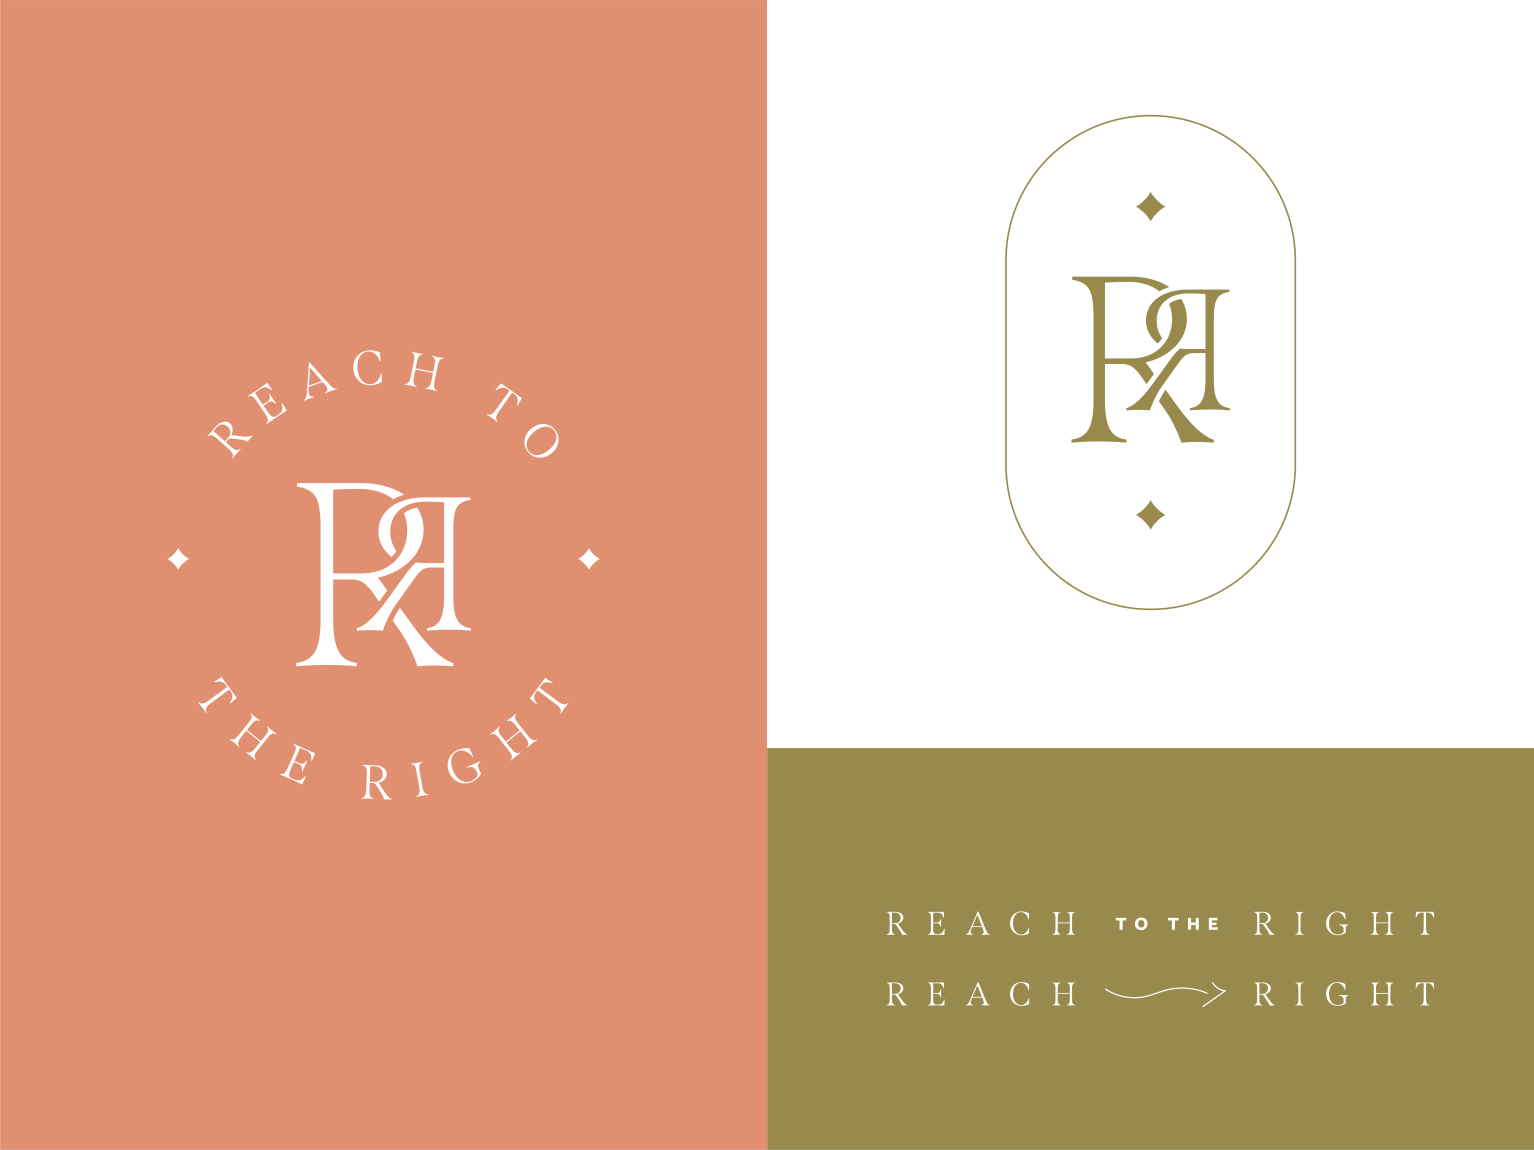 Reach to the Right Identity by Matthew Gillespie on Dribbble